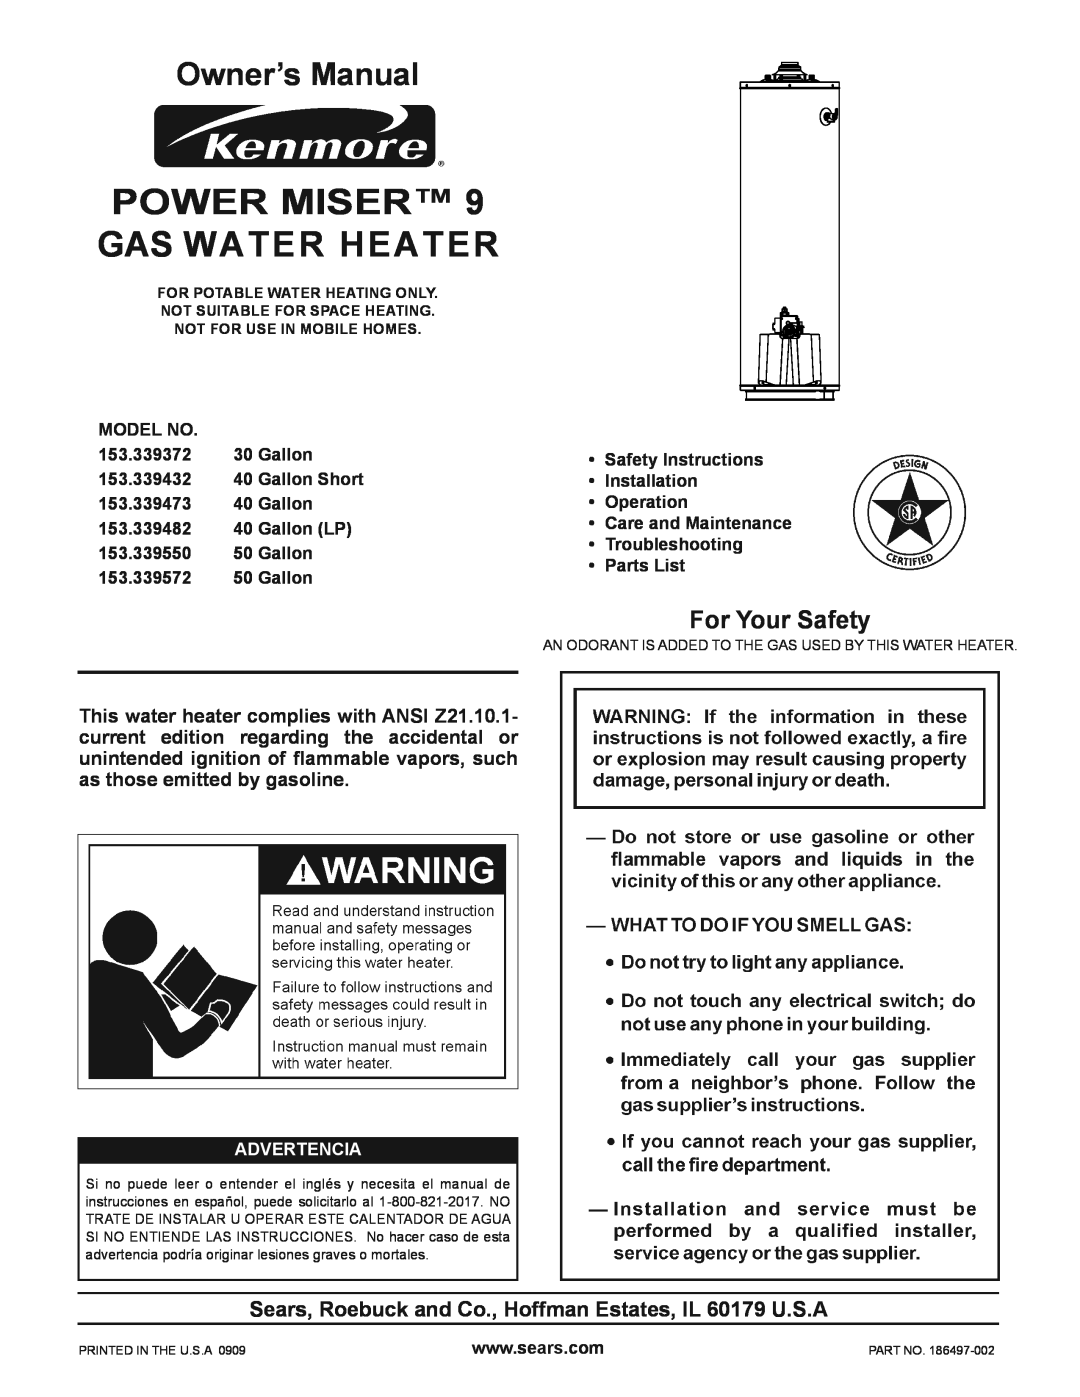 Kenmore 153.33955, 153.339572, 153.339473 owner manual For Your Safety, POWER MISER 9 GAS WATER HEATER, Advertencia 